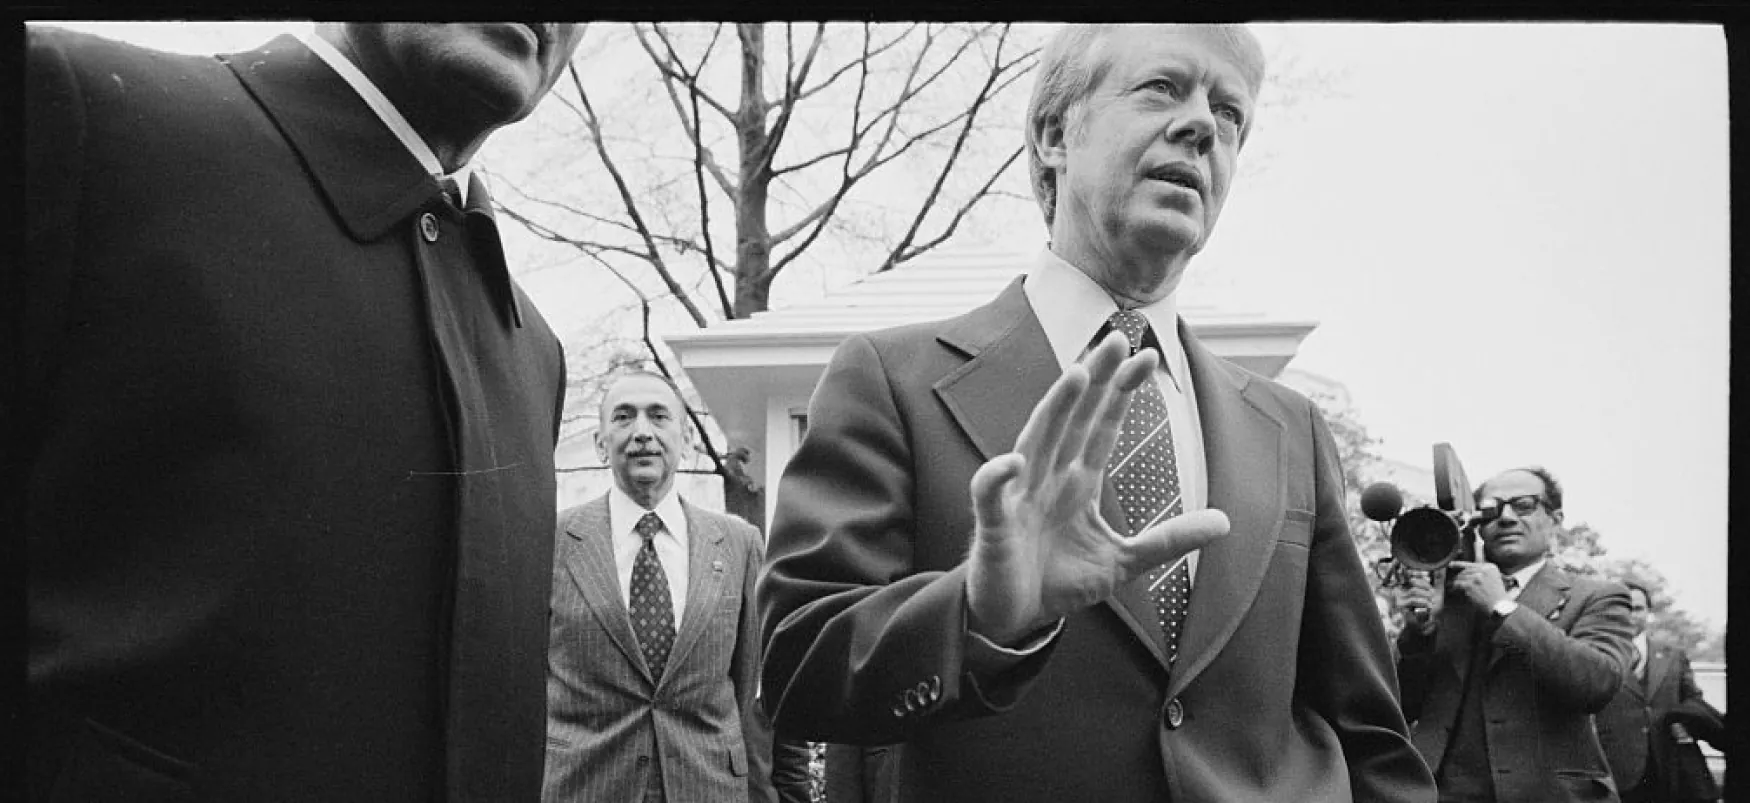 President Jimmy Carter stands outdoors, speaking, next to a man whose face is cut out of the photograph. A camera crew in the background films the president.